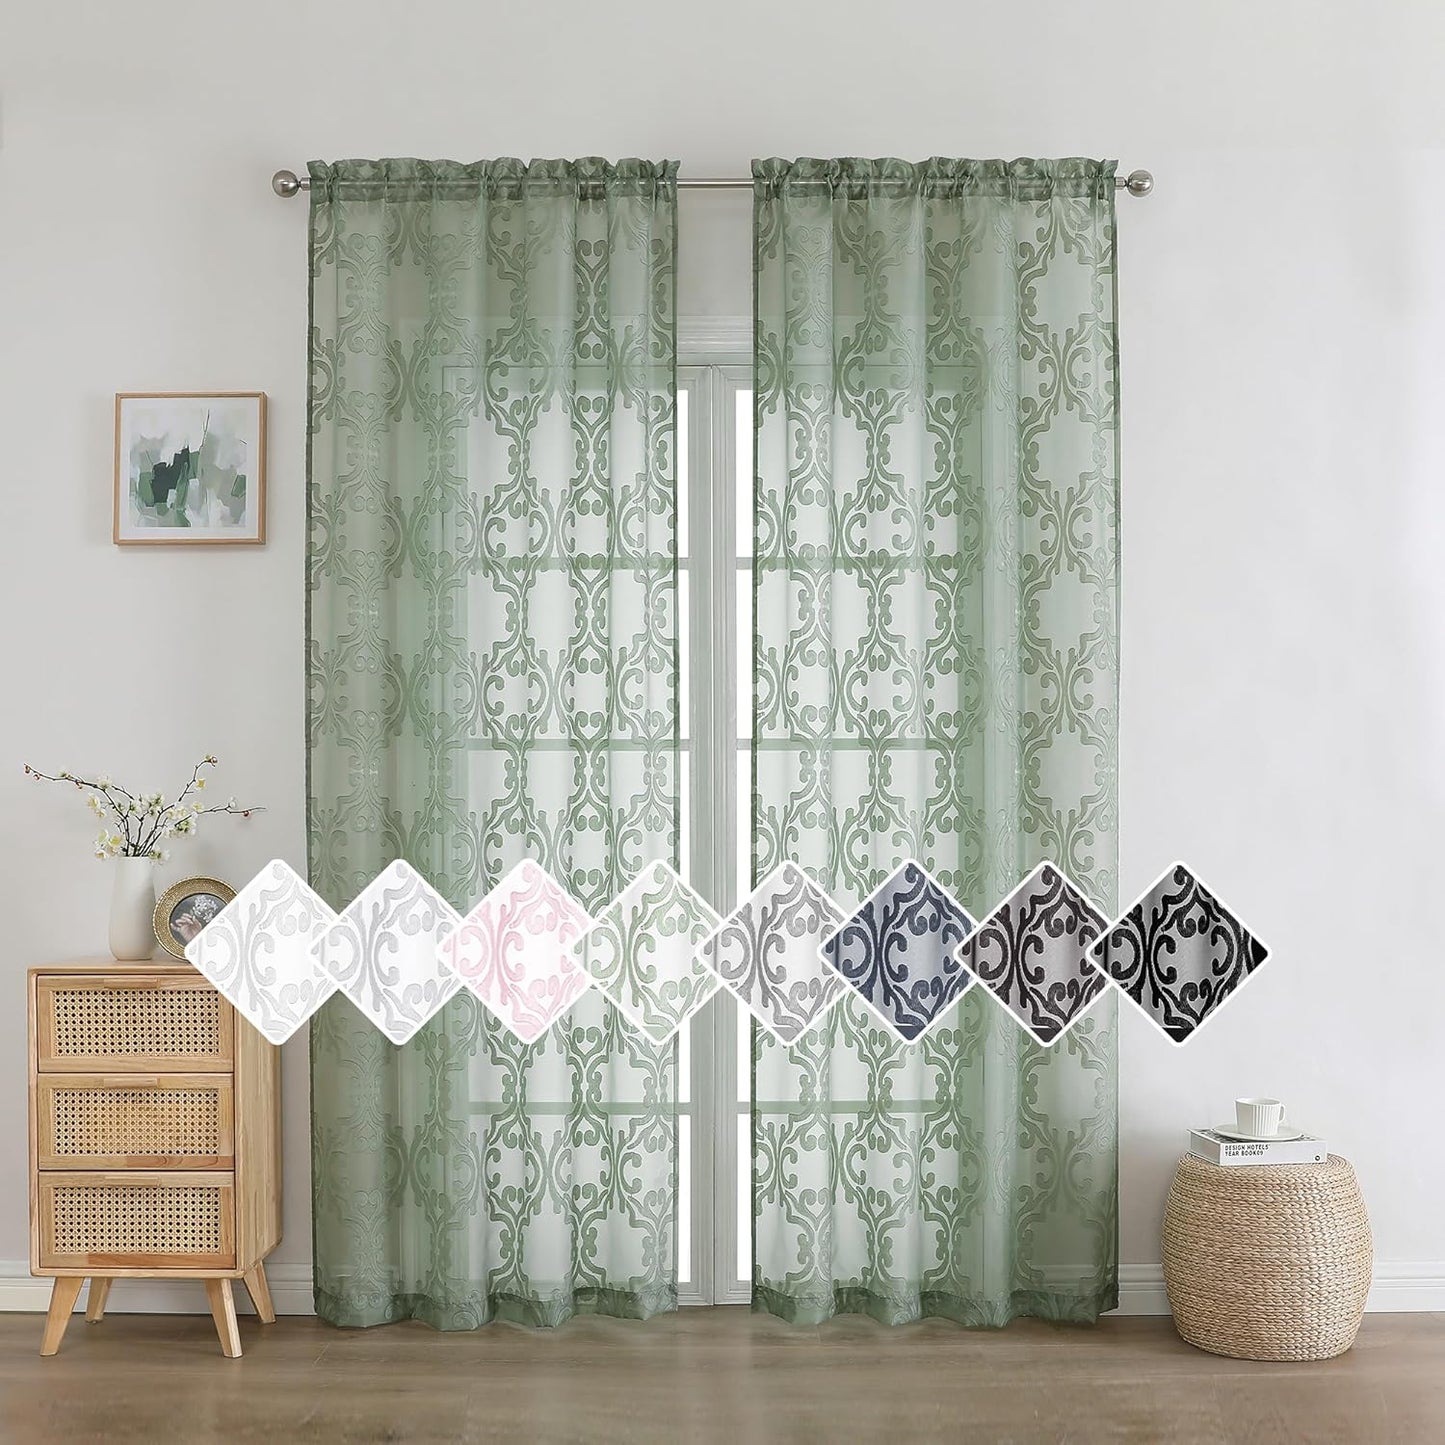 Aiyufeng Suri 2 Panels Sheer Sage Green Curtains 63 Inches Long, Light & Airy Privacy Textured Sheer Drapes, Dual Rod Pocket Voile Clipped Floral Luxury Panels for Bedroom Living Room, 42 X 63 Inch  Aiyufeng Sage Green 2X42X84" 